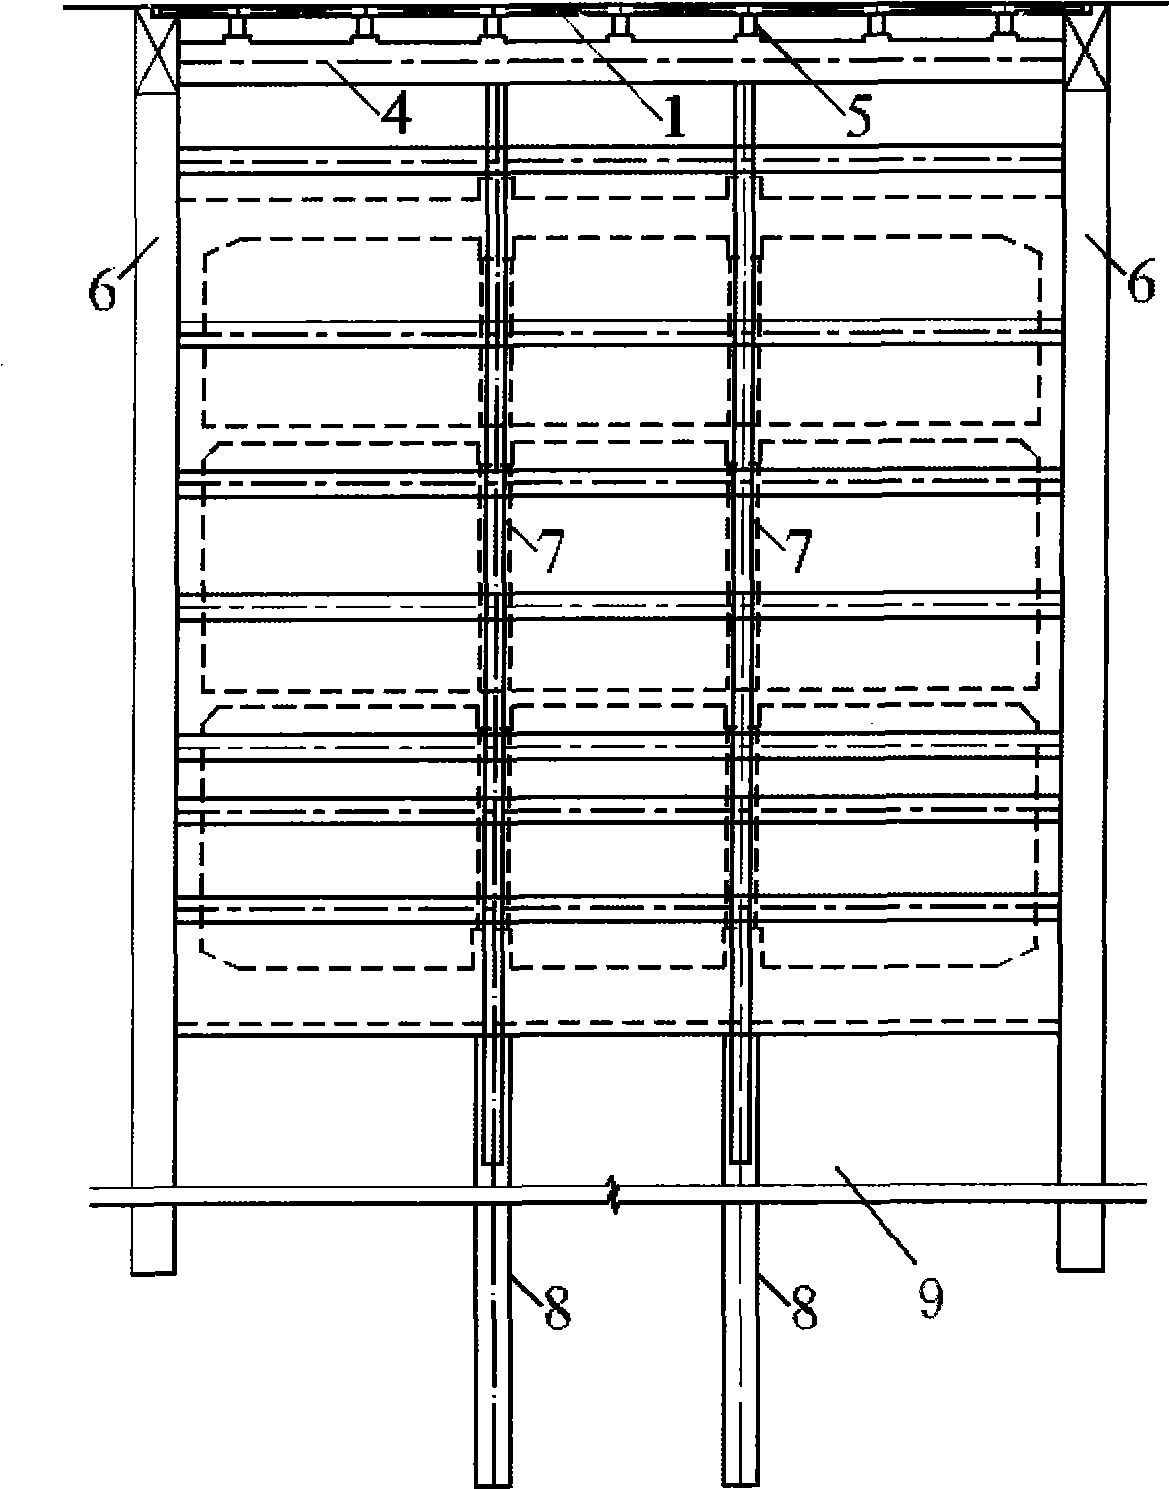 Digging method foundation pit structure of steel cover and plate cover, and construction method